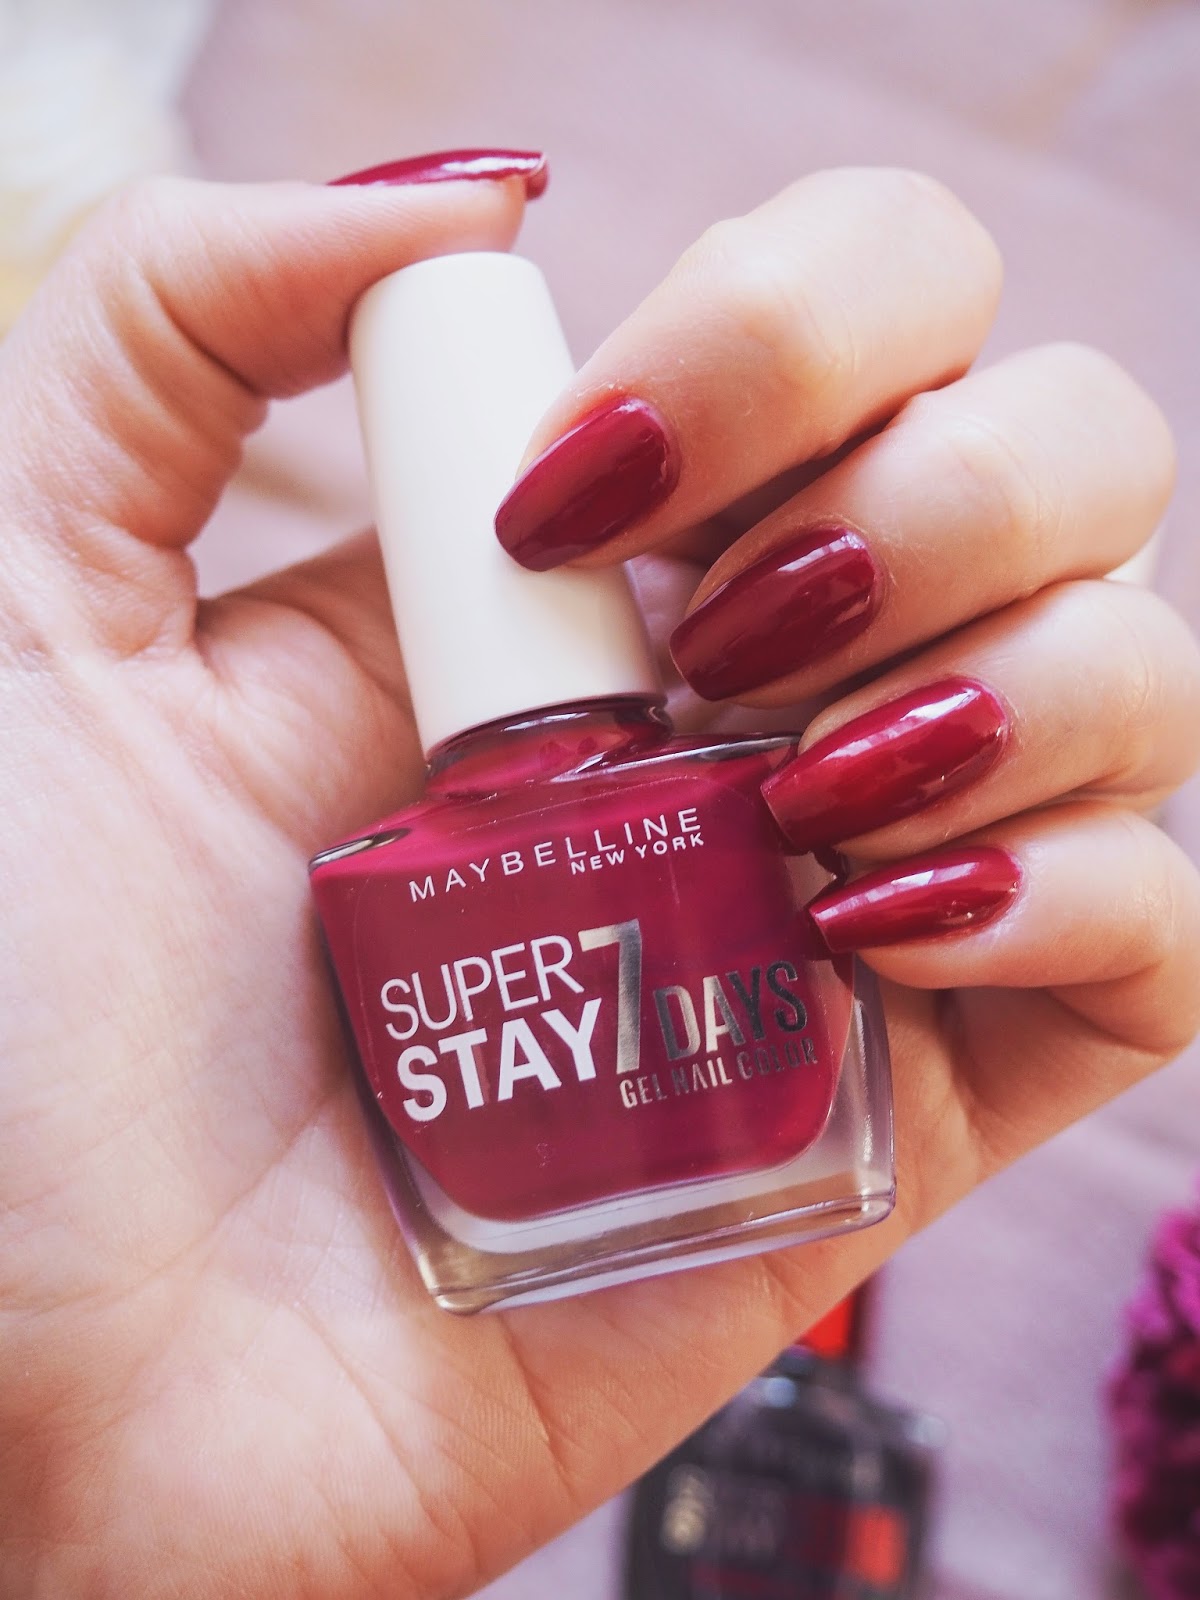 Maybelline Superstay 7 Days Gel Nail Color: 7-Day Promise True? | Pam  Scalfi♥